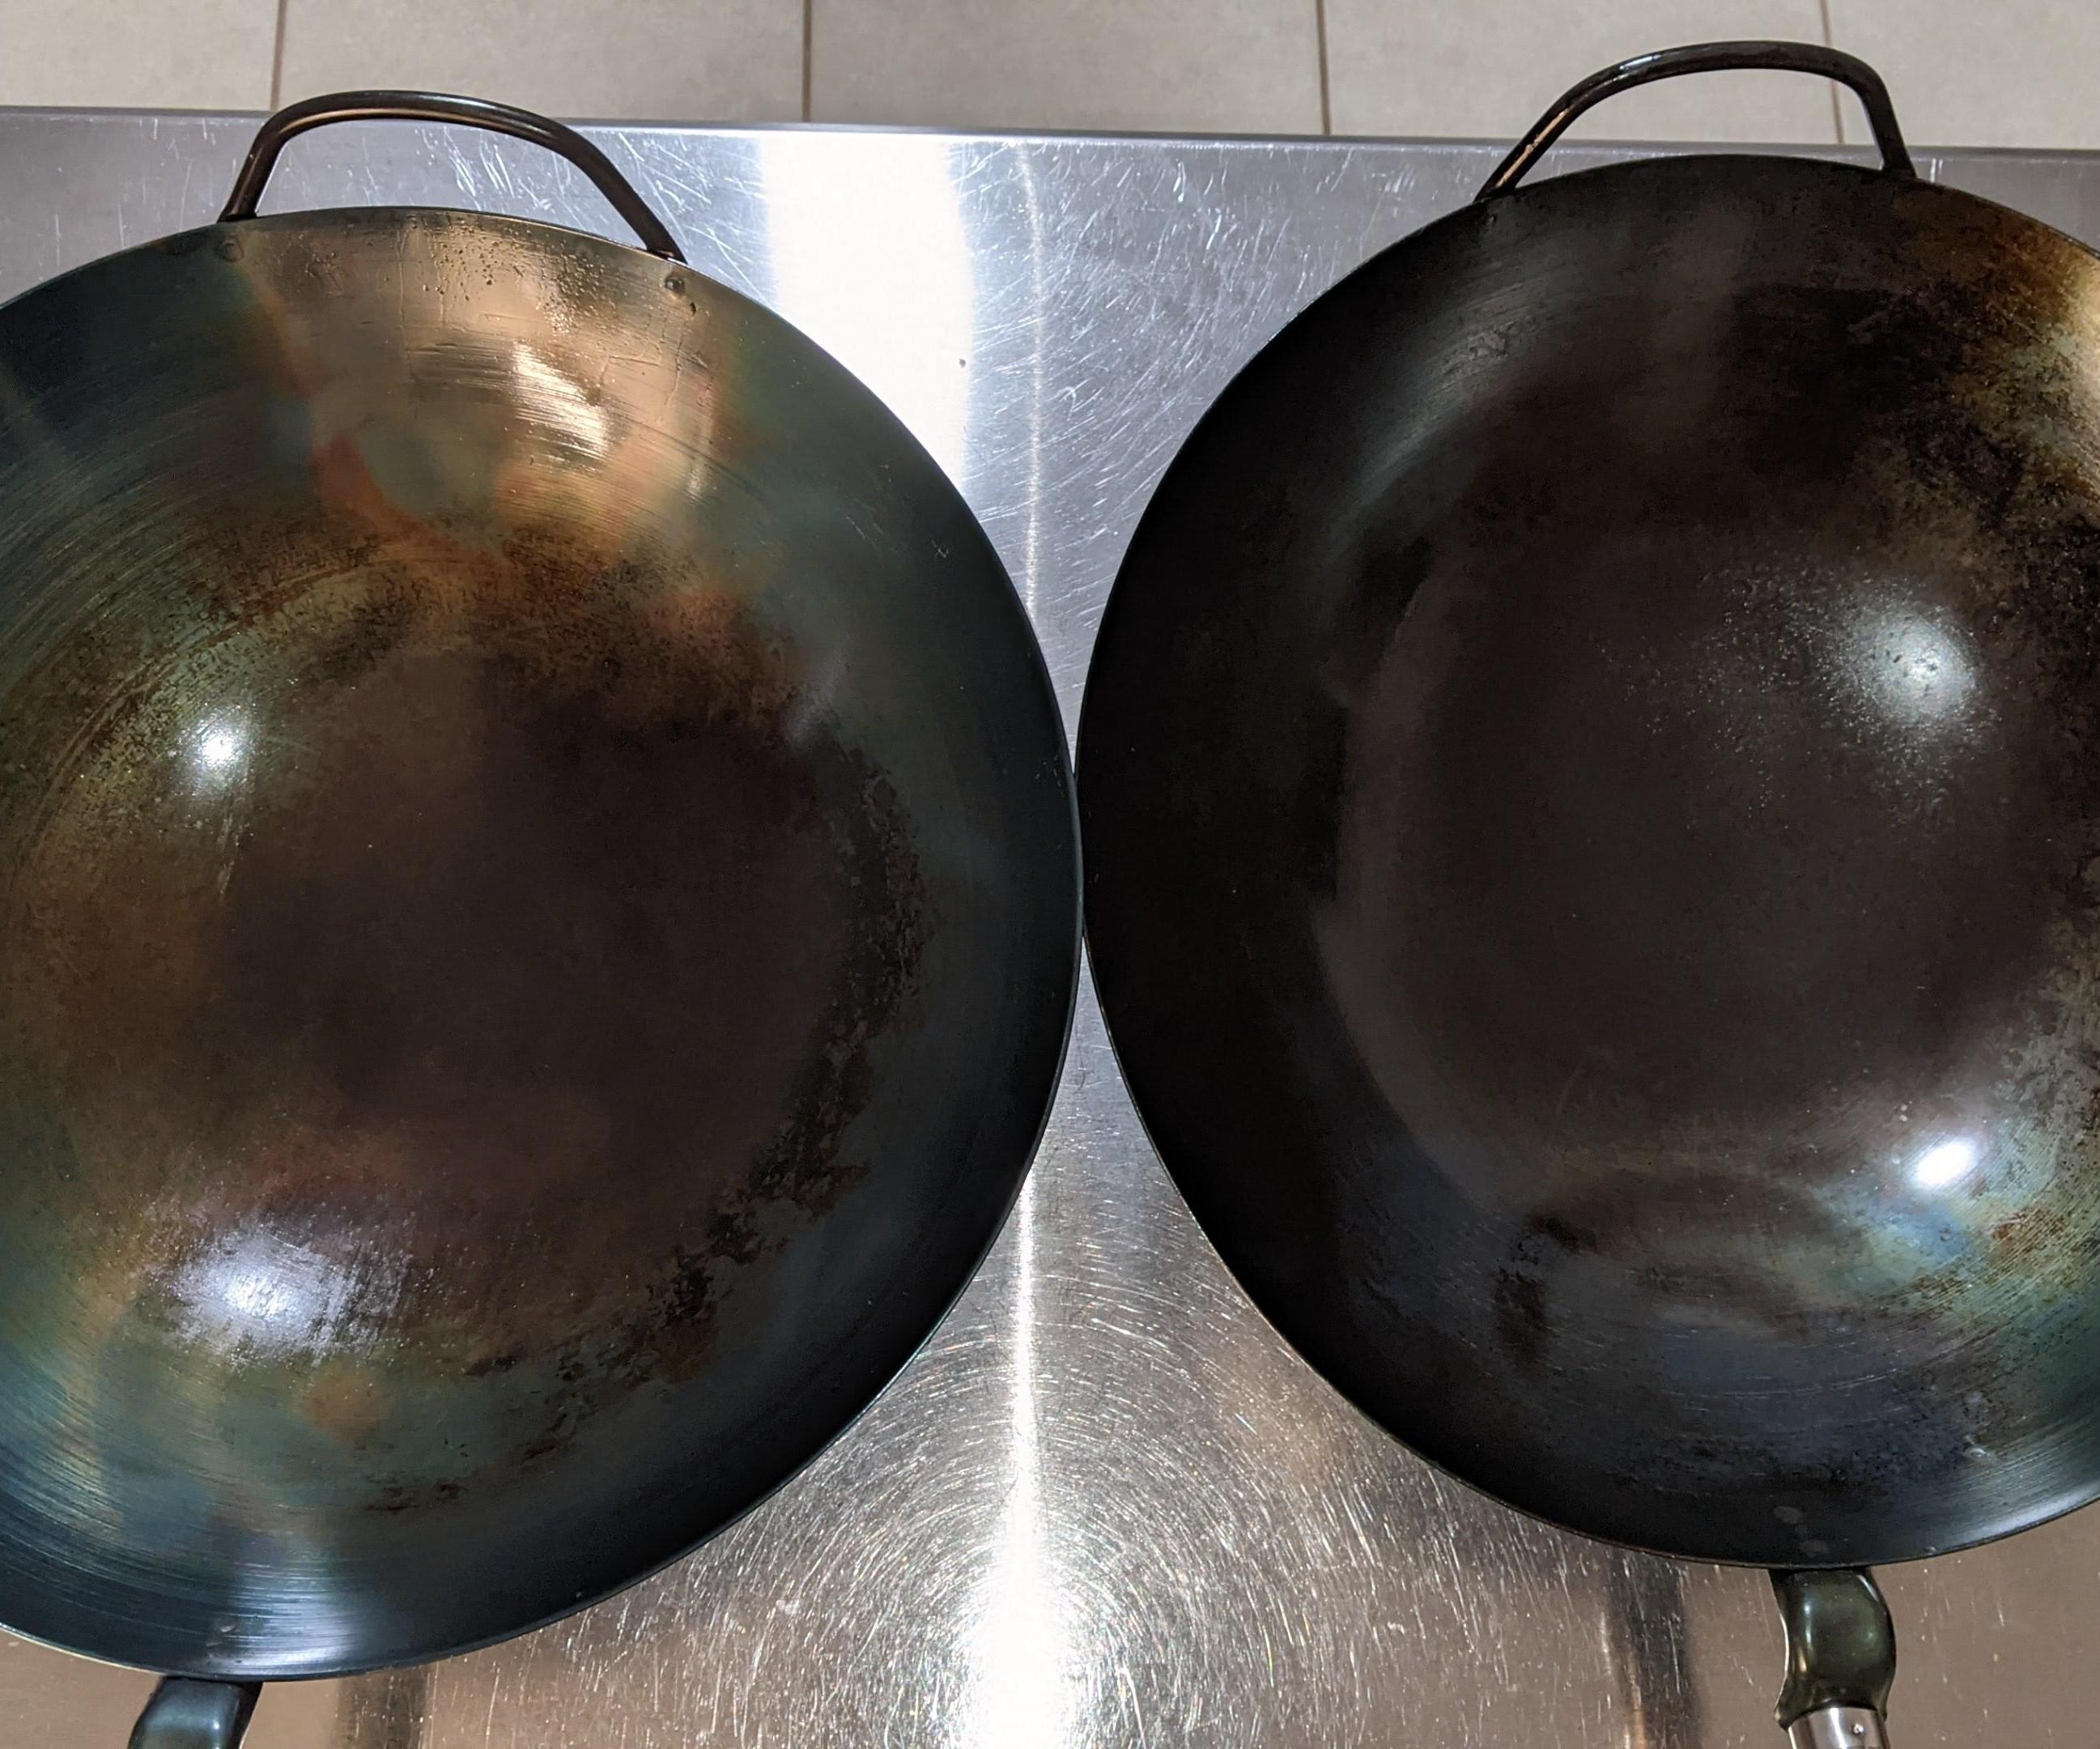 How to Season a Carbon Steel Wok (The Best Way)